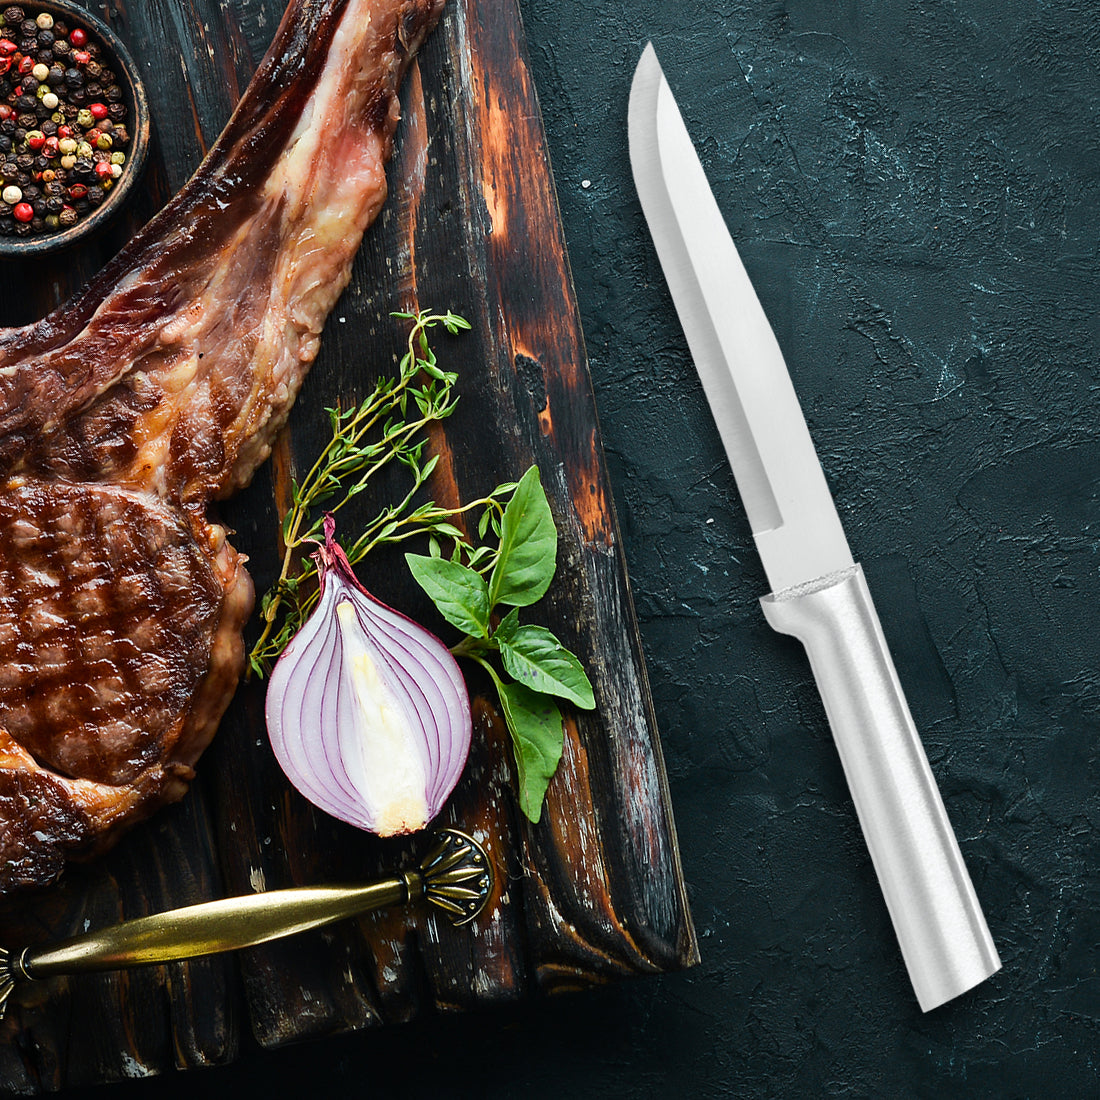 Slicing Meat? Do it Right With the Best Butcher's Knives for Butchers,  Chefs and At-Home Cooking